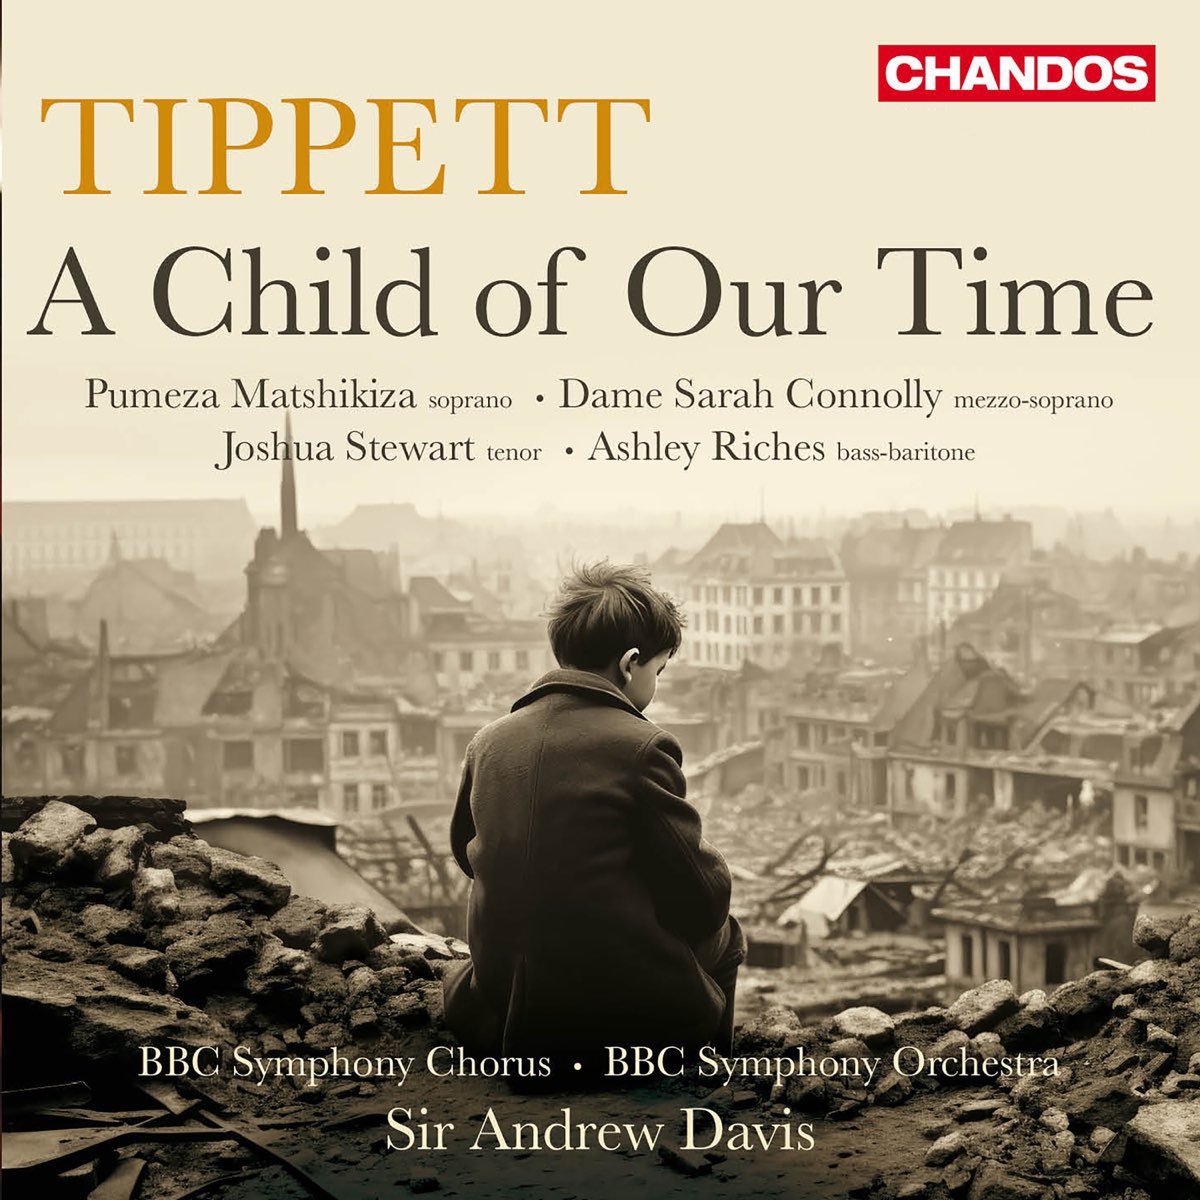 “Michael Tippett’s oratorio A Child of Our Time was composed between 1939 and 1942 as a direct response to the events leading up to (and including) the notorious Kristallnacht, in November 1938, in National Socialist Germany.”